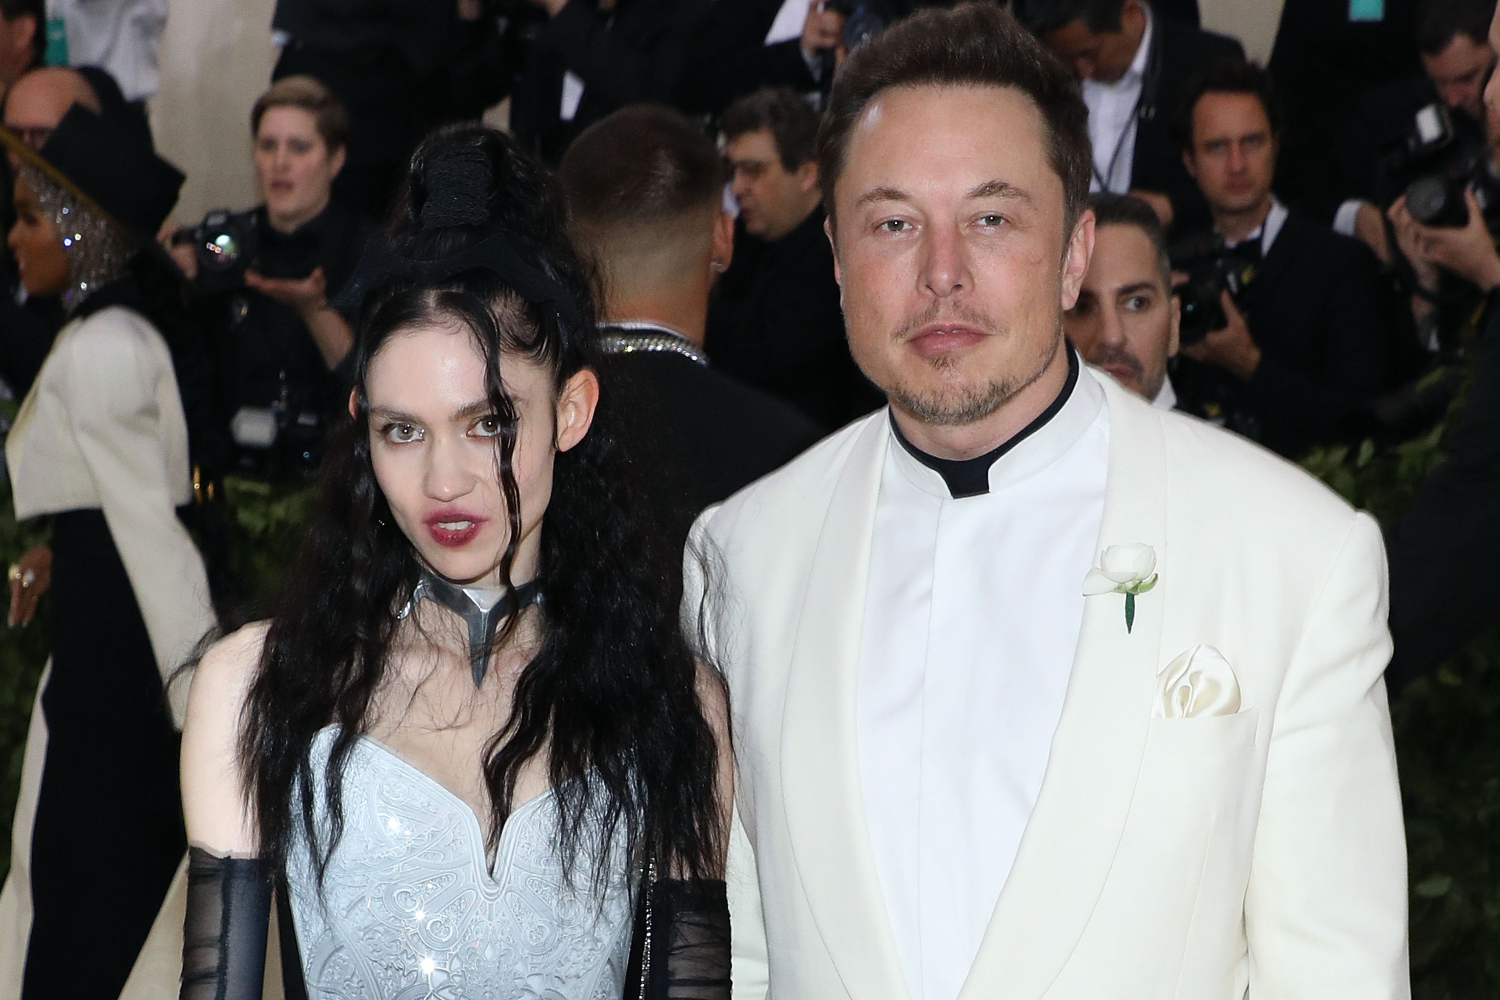 Grimes and Elon Musk attend "Heavenly Bodies: Fashion & the Catholic Imagination", the 2018 Costume Institute Benefit at Metropolitan Museum of Art on May 7, 2018 in New York City